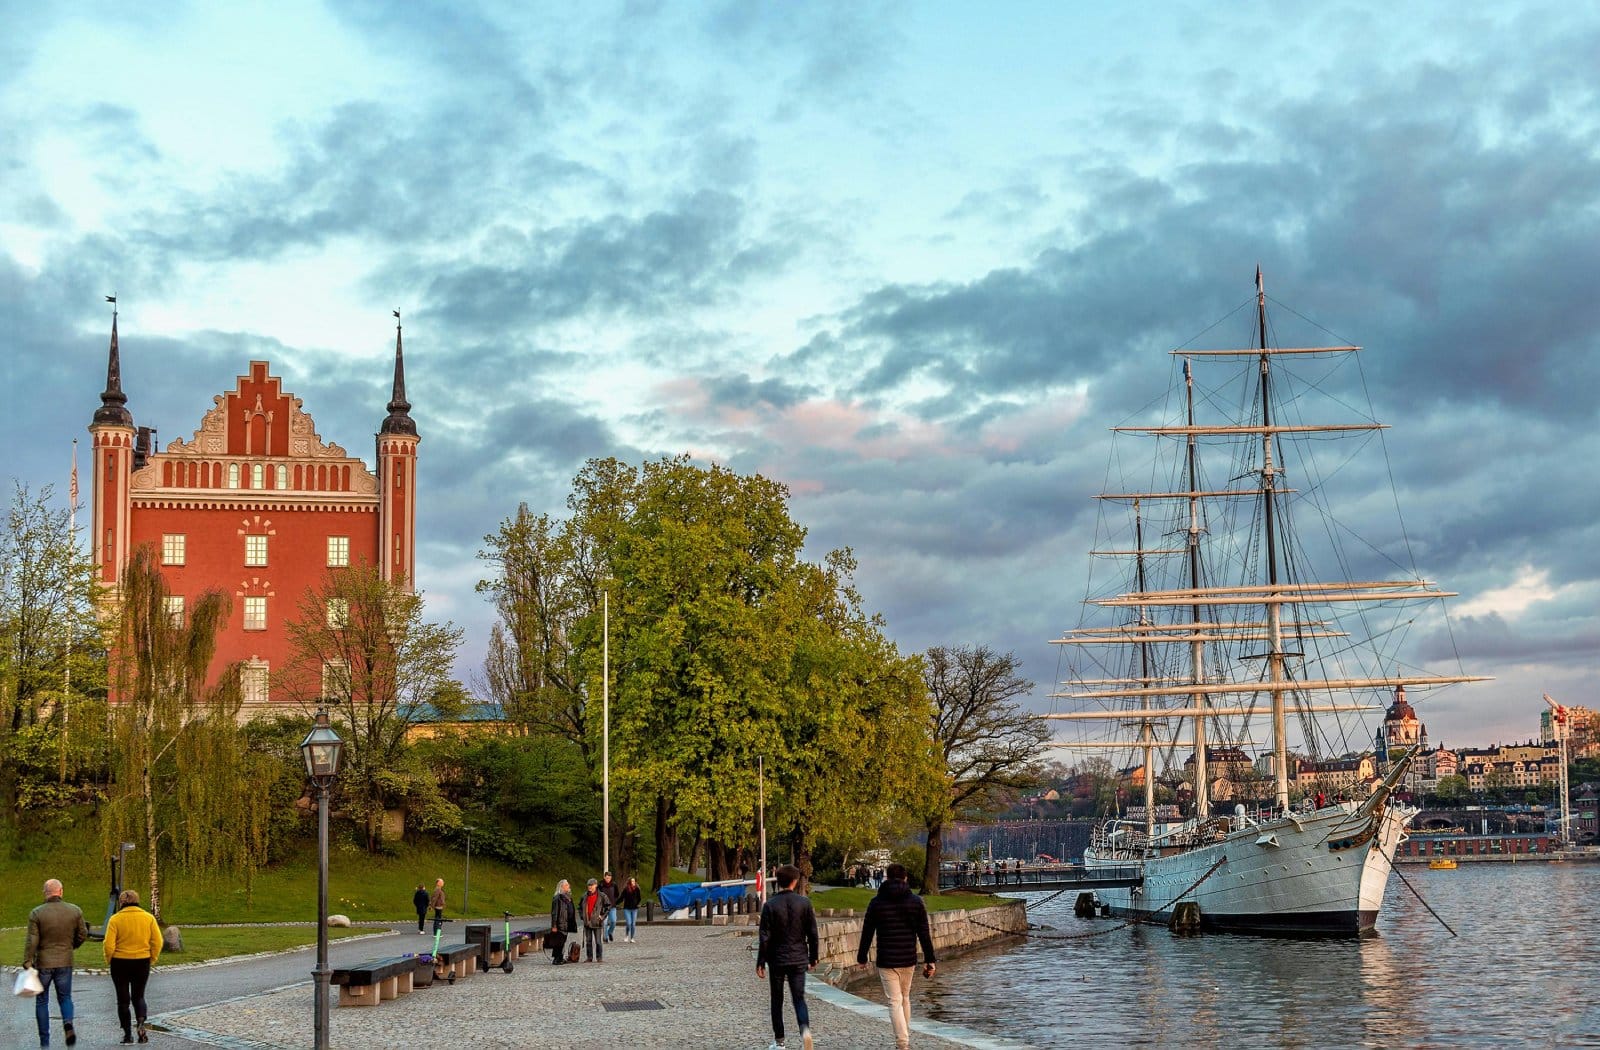 Image Credit: Pexels / Vicente Viana Martínez <p>Embrace Stockholm’s maritime heritage with weekends spent exploring the city’s archipelago islands by ferry, canoeing along scenic waterways, and swimming in clean urban beaches. Discover Swedish design with visits to museums, galleries, and boutiques showcasing Scandinavian furniture, fashion, and art.</p>